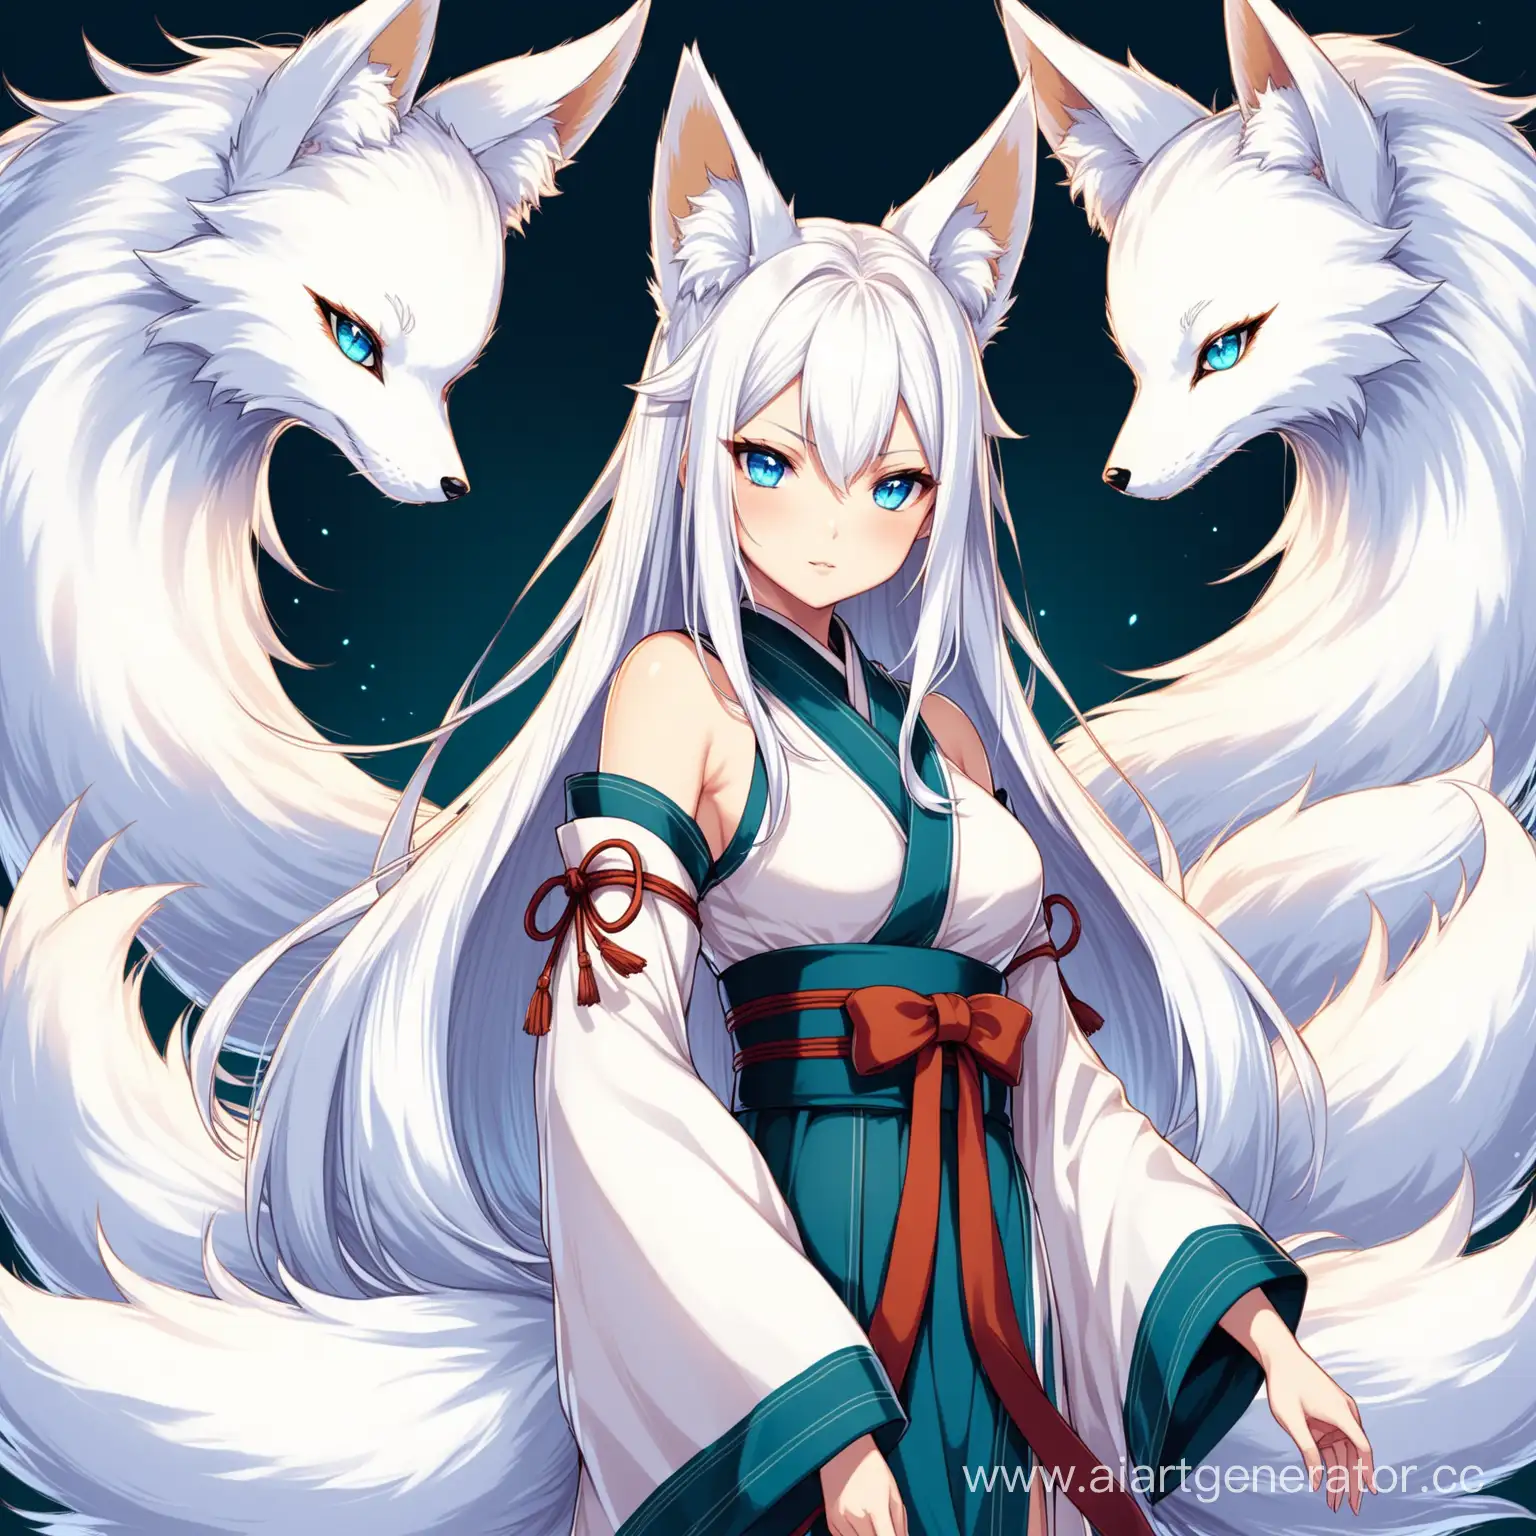 Kitsune-Girl-with-Eleven-Tails-Enchanting-WhiteHaired-Vixen-in-Azure-Eyes-and-Abundant-Charms